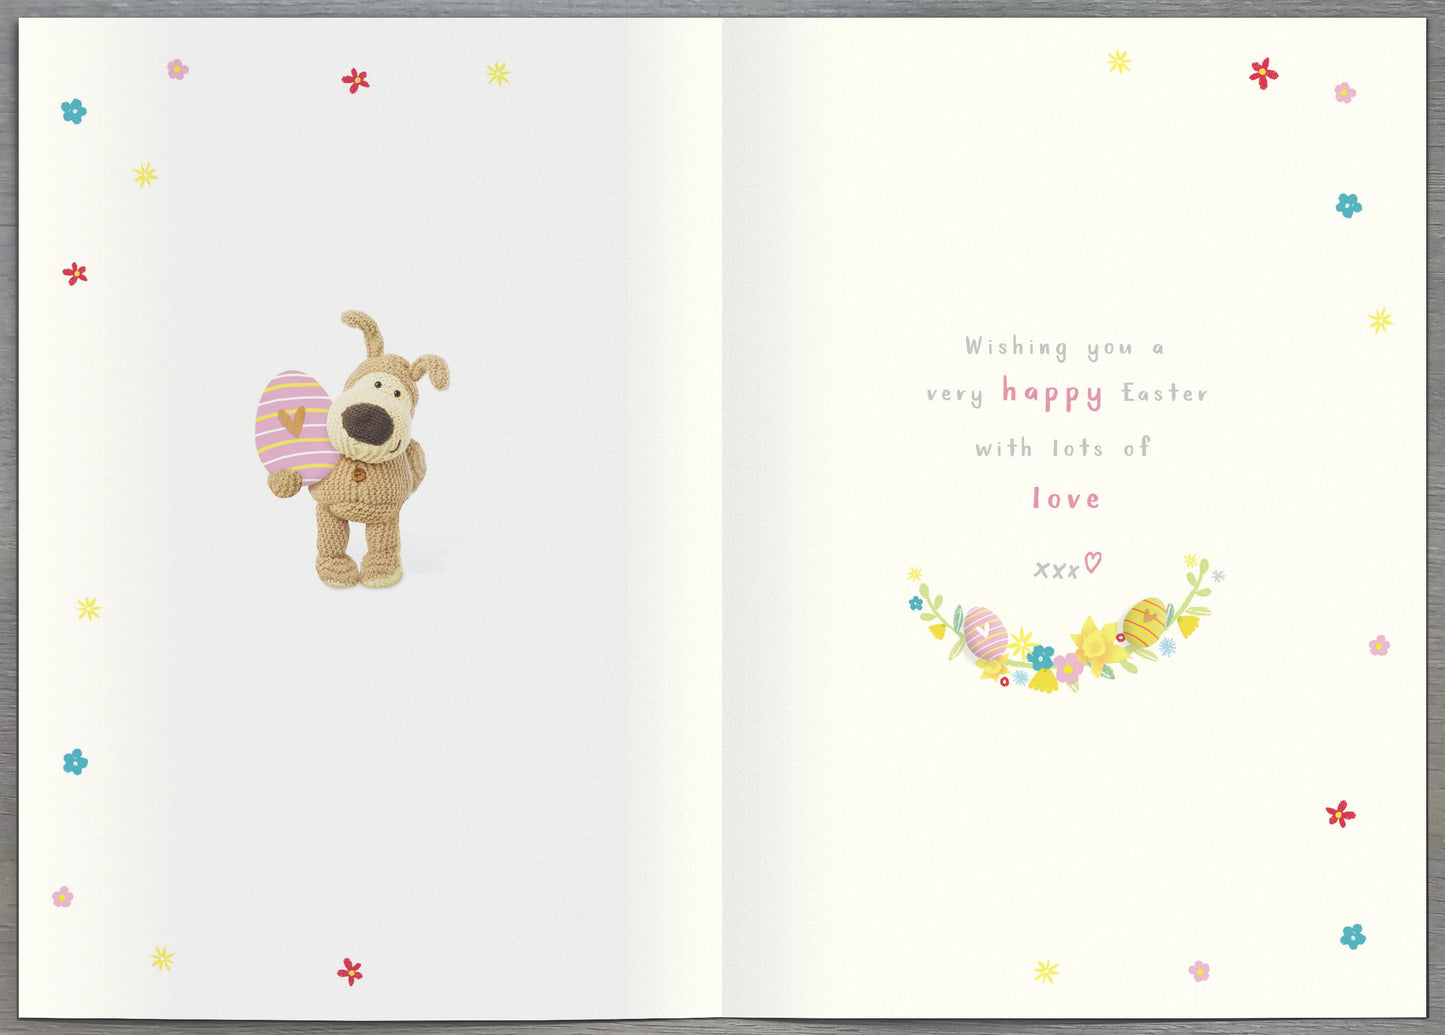 Boofle Very Special Daughter Egg-static Floral Easter Card Cute Greeting Card